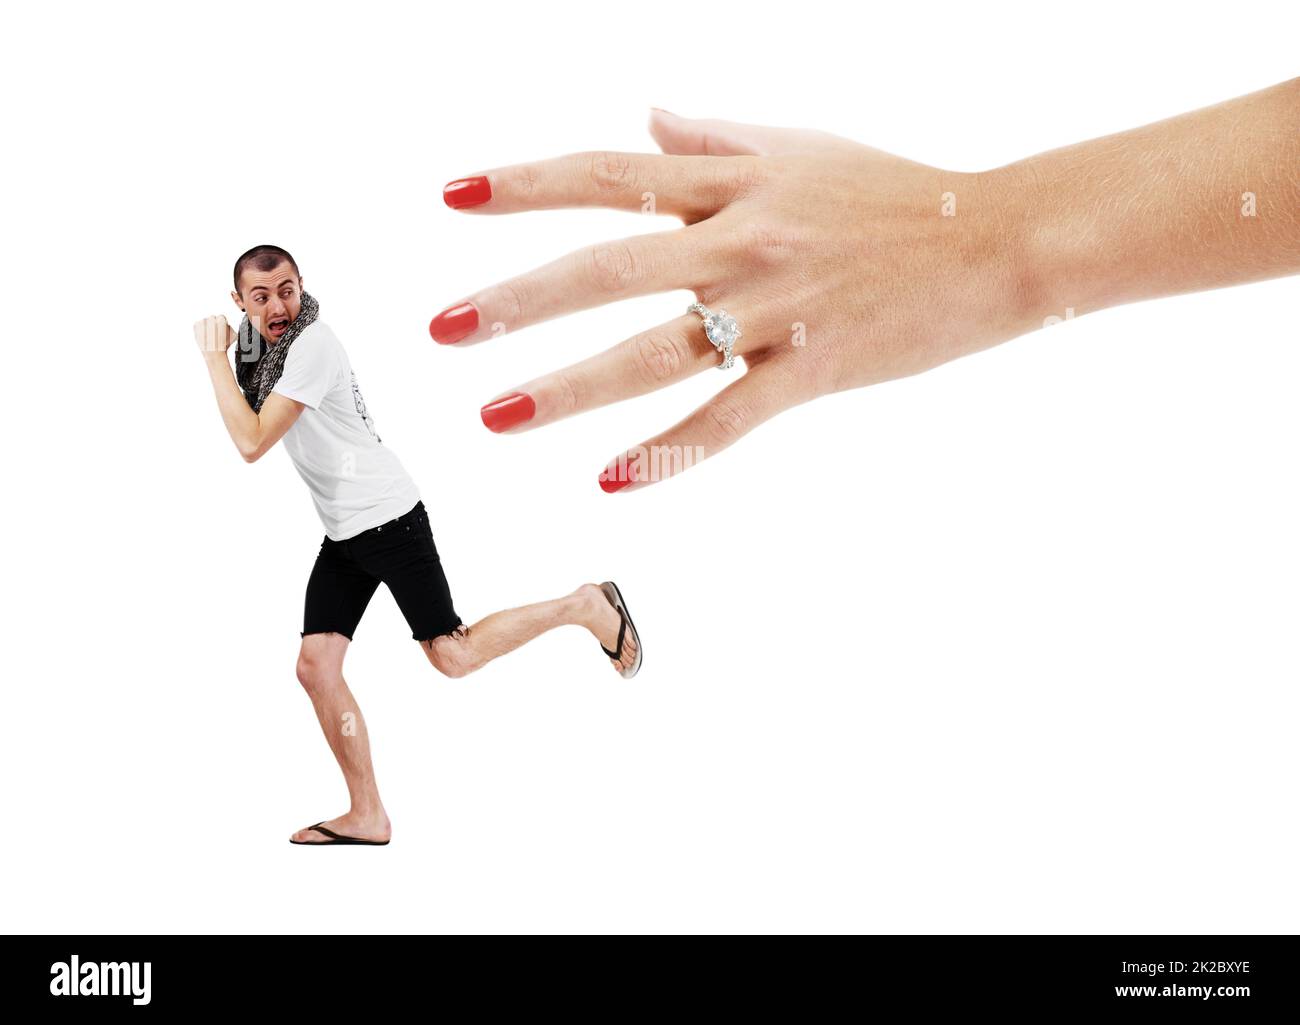 Fear of commitment. A young man trying to run away from a giant hand wearing a wedding ring. Stock Photo